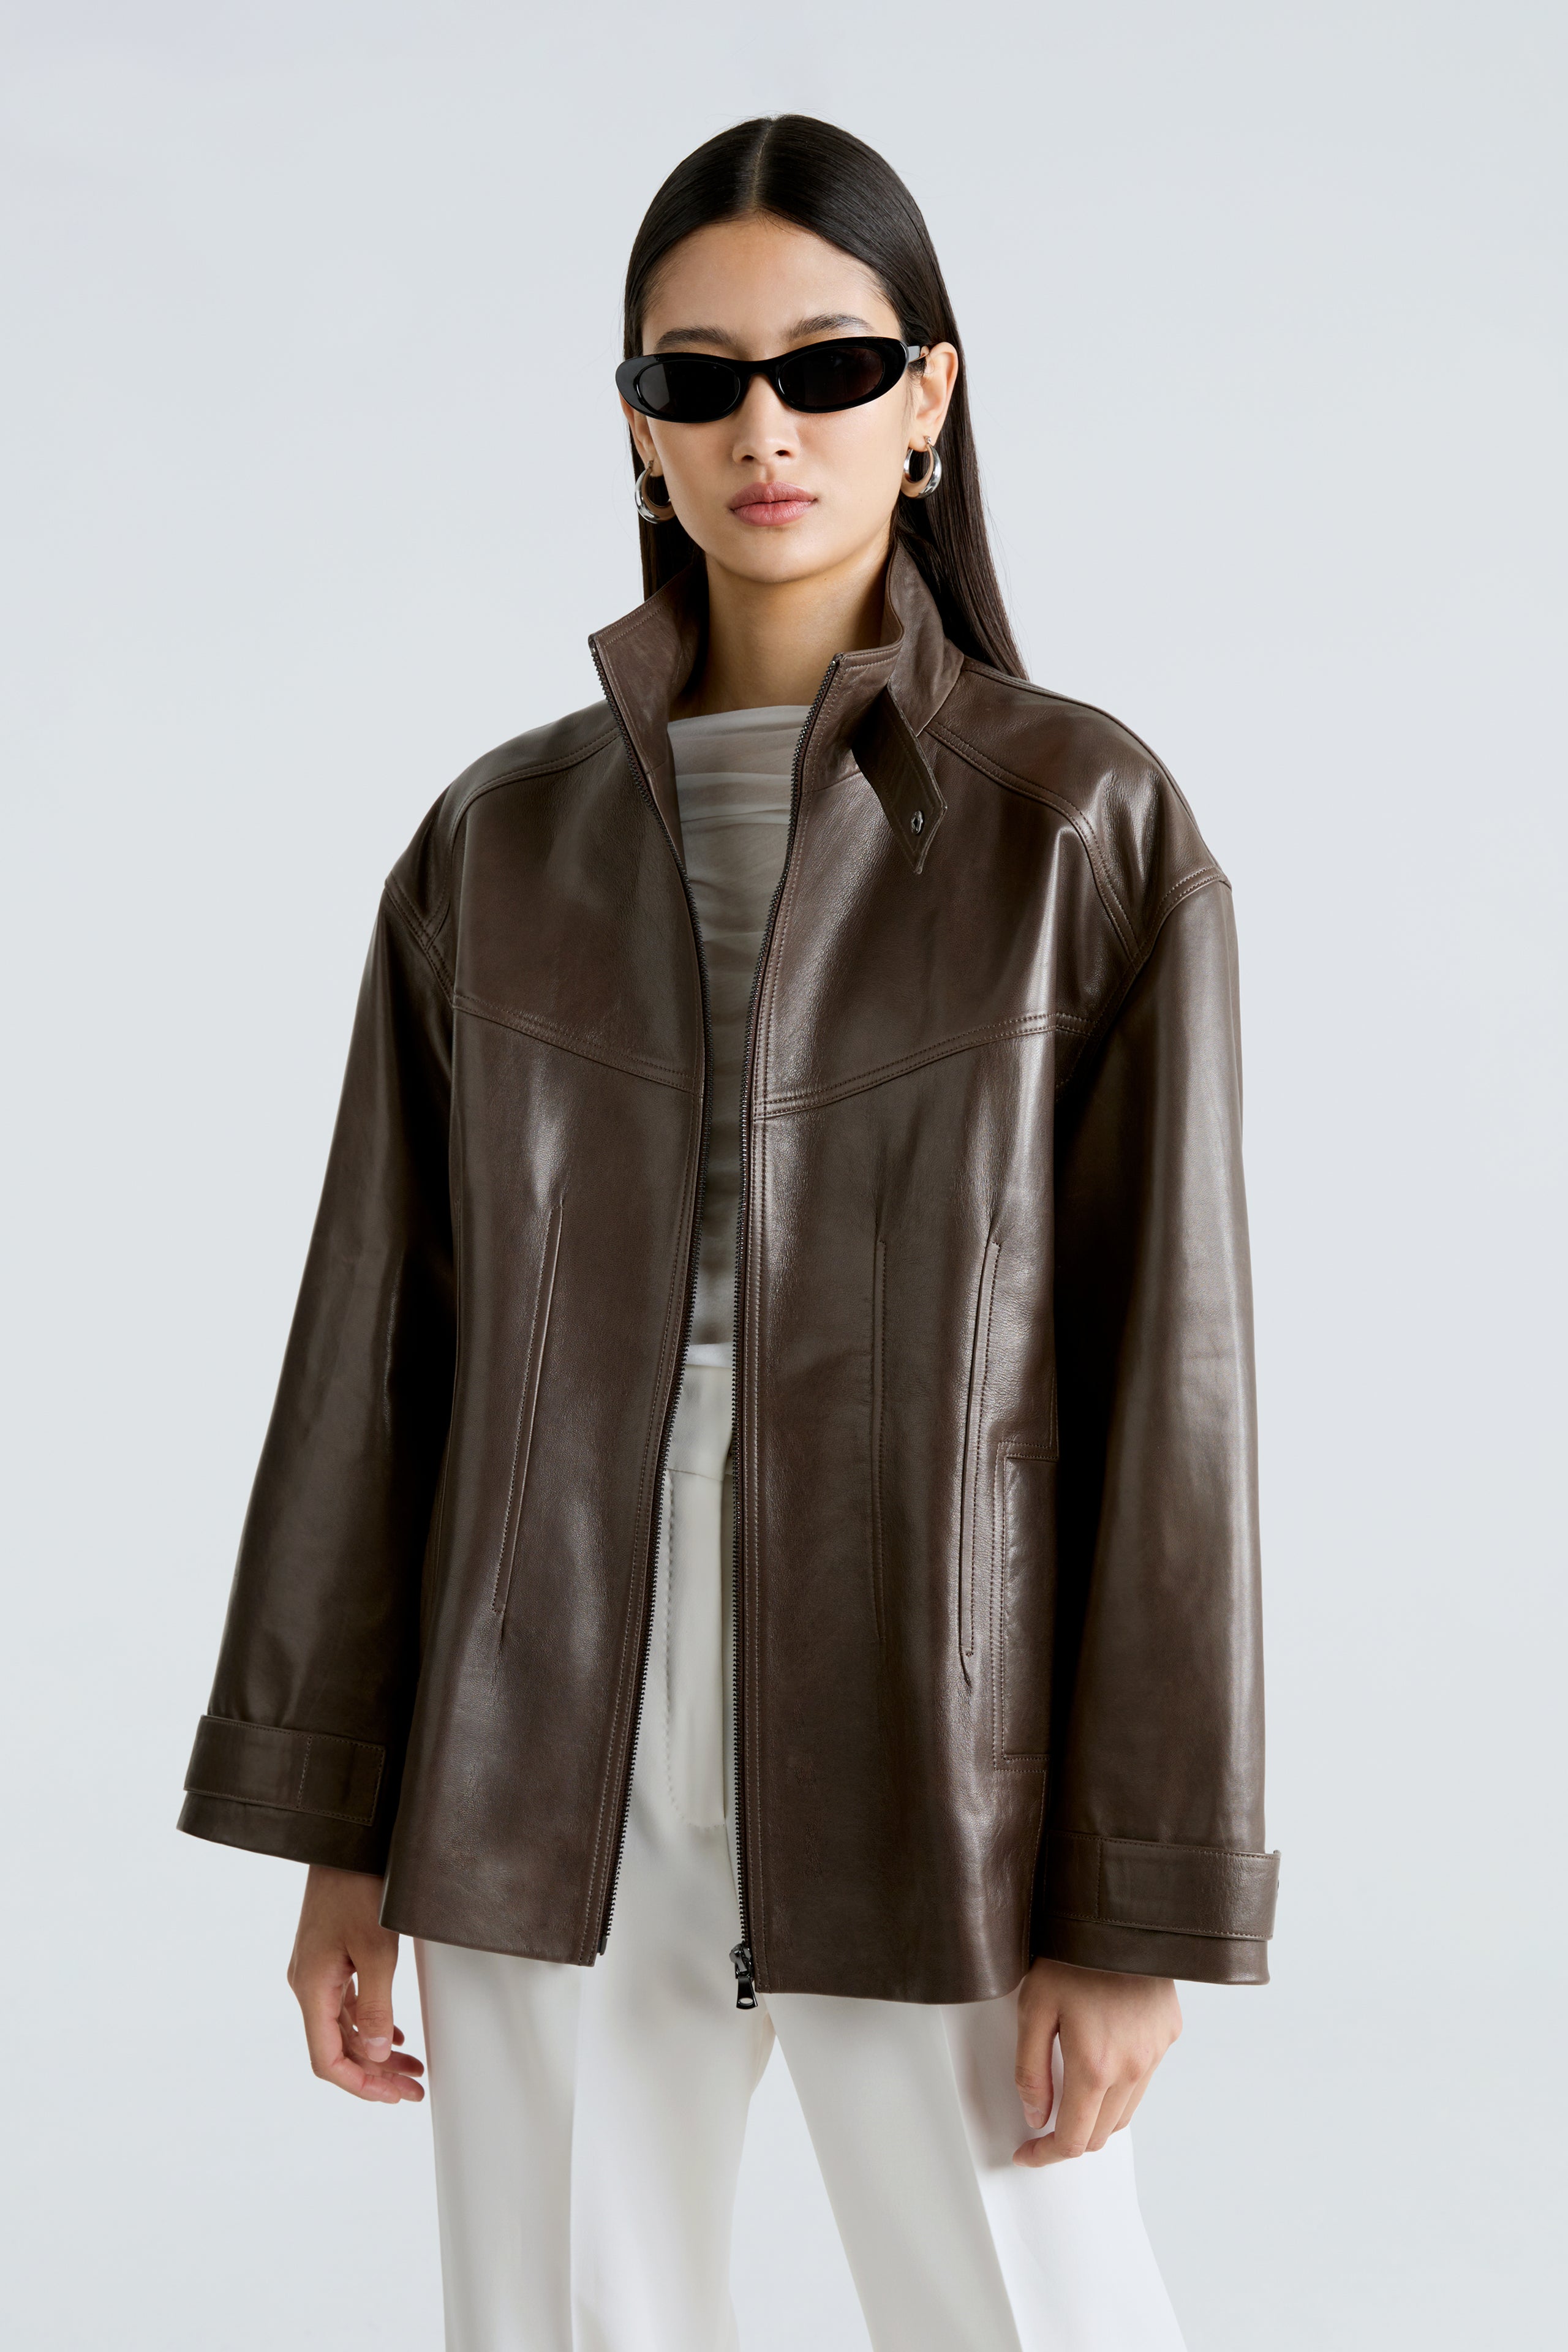 Model is wearing the Rue Truffle Leather Bomber Jacket Close Up